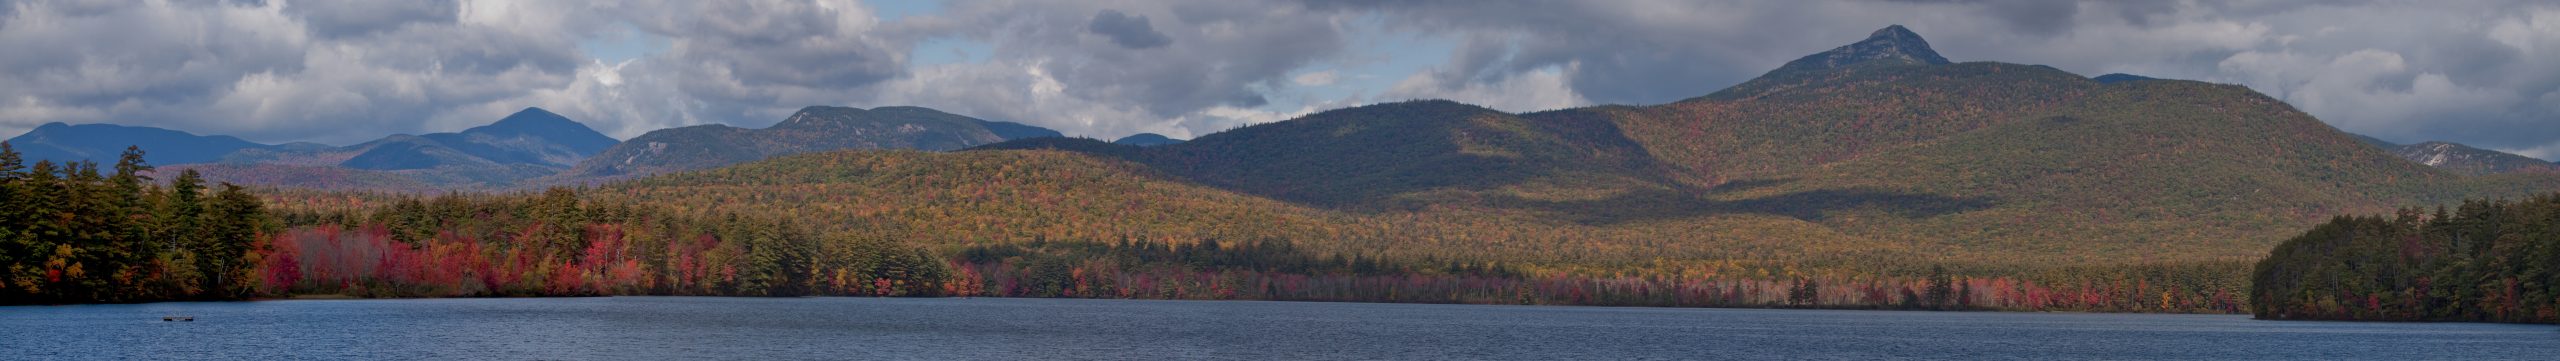 Mount Chocorua (user submitted)